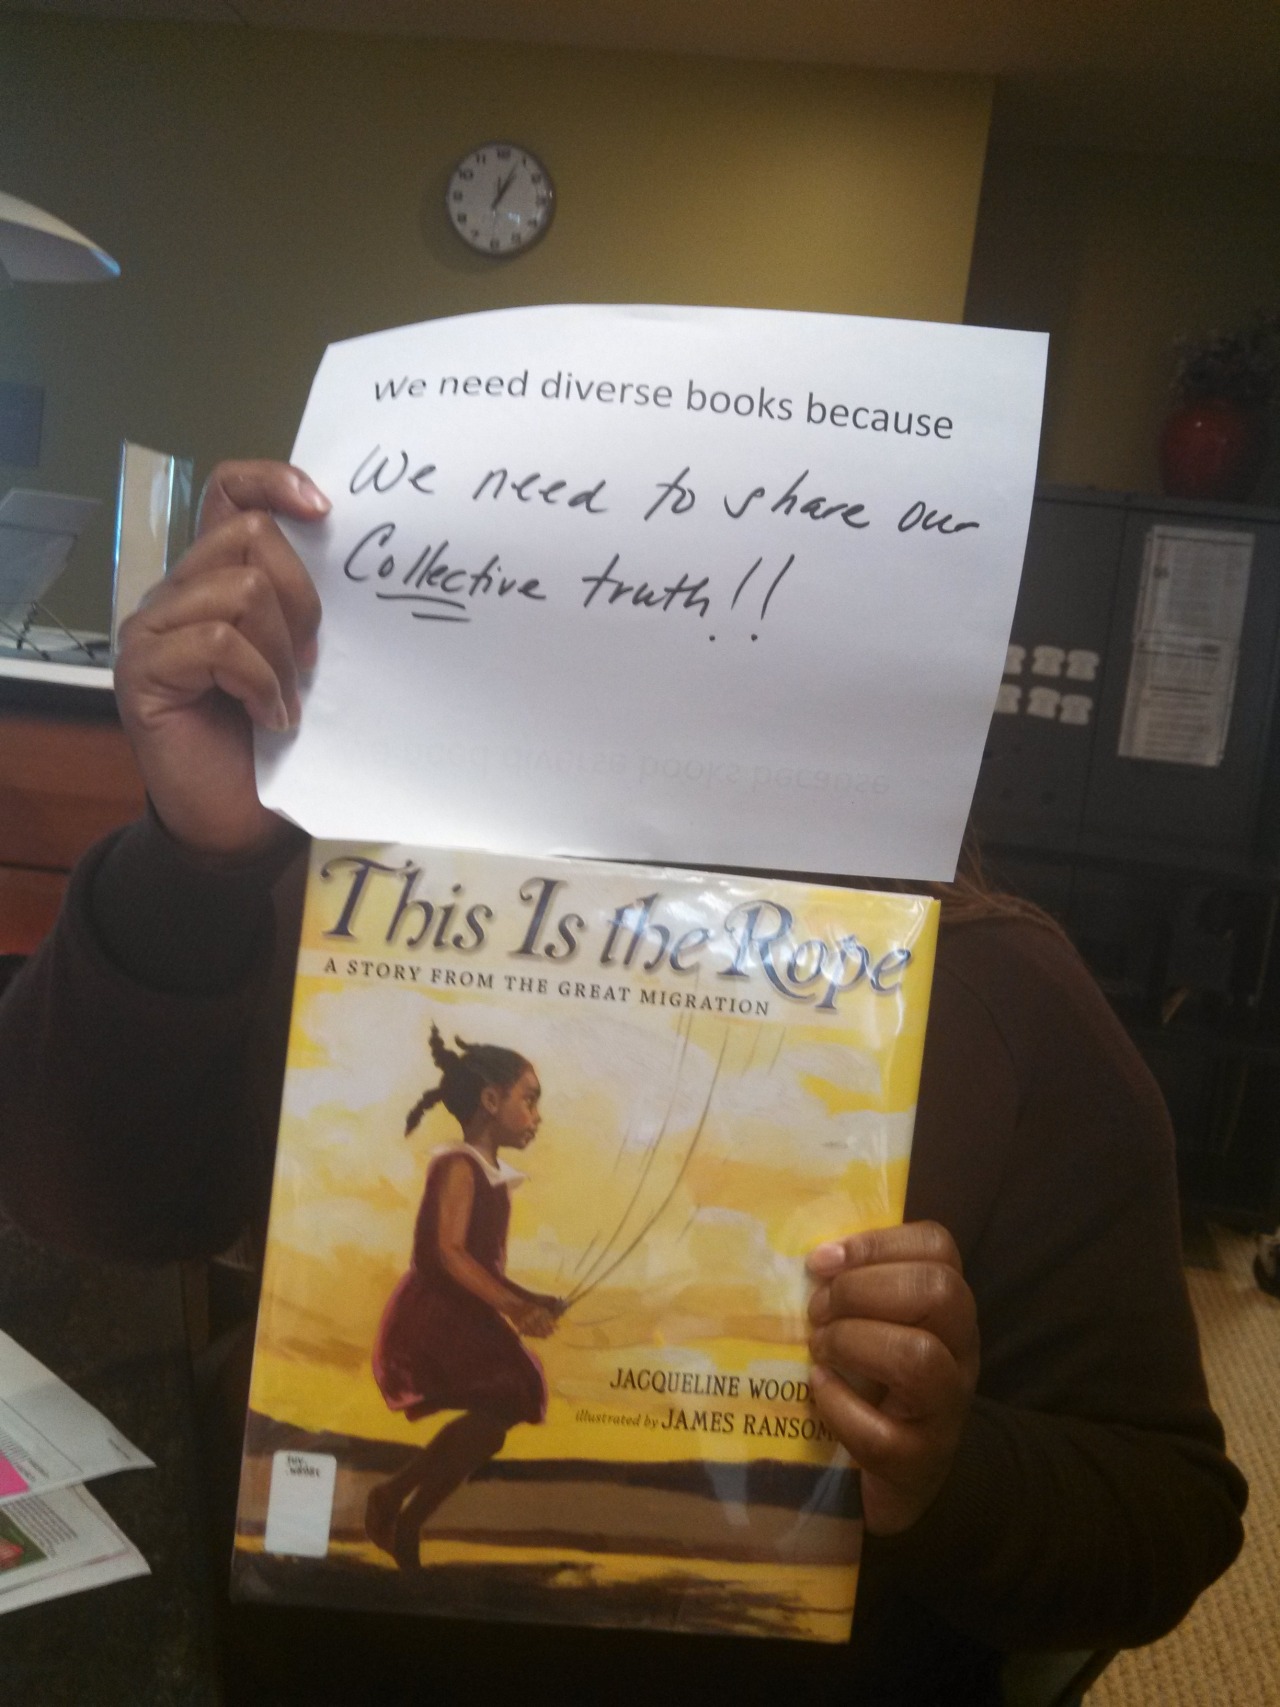 #WeNeedDiverseBooks because  we need to share our collective truth!